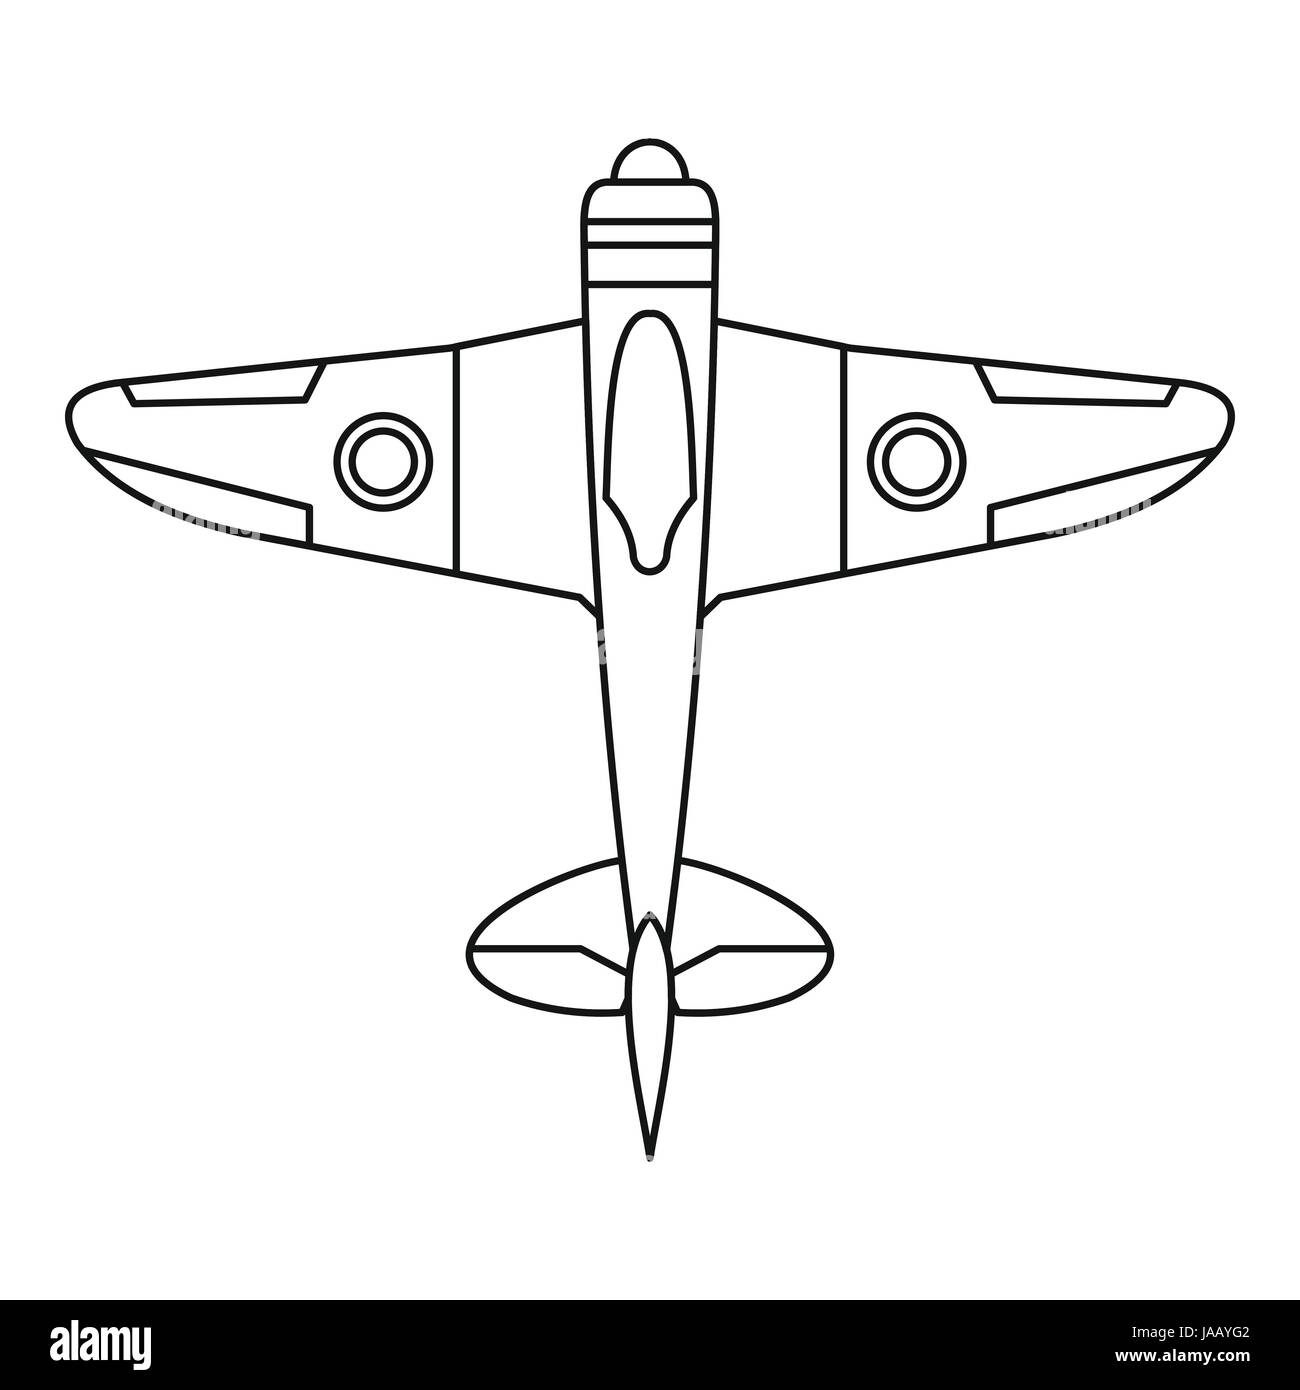 How to Draw Jets in 6 Steps | HowStuffWorks